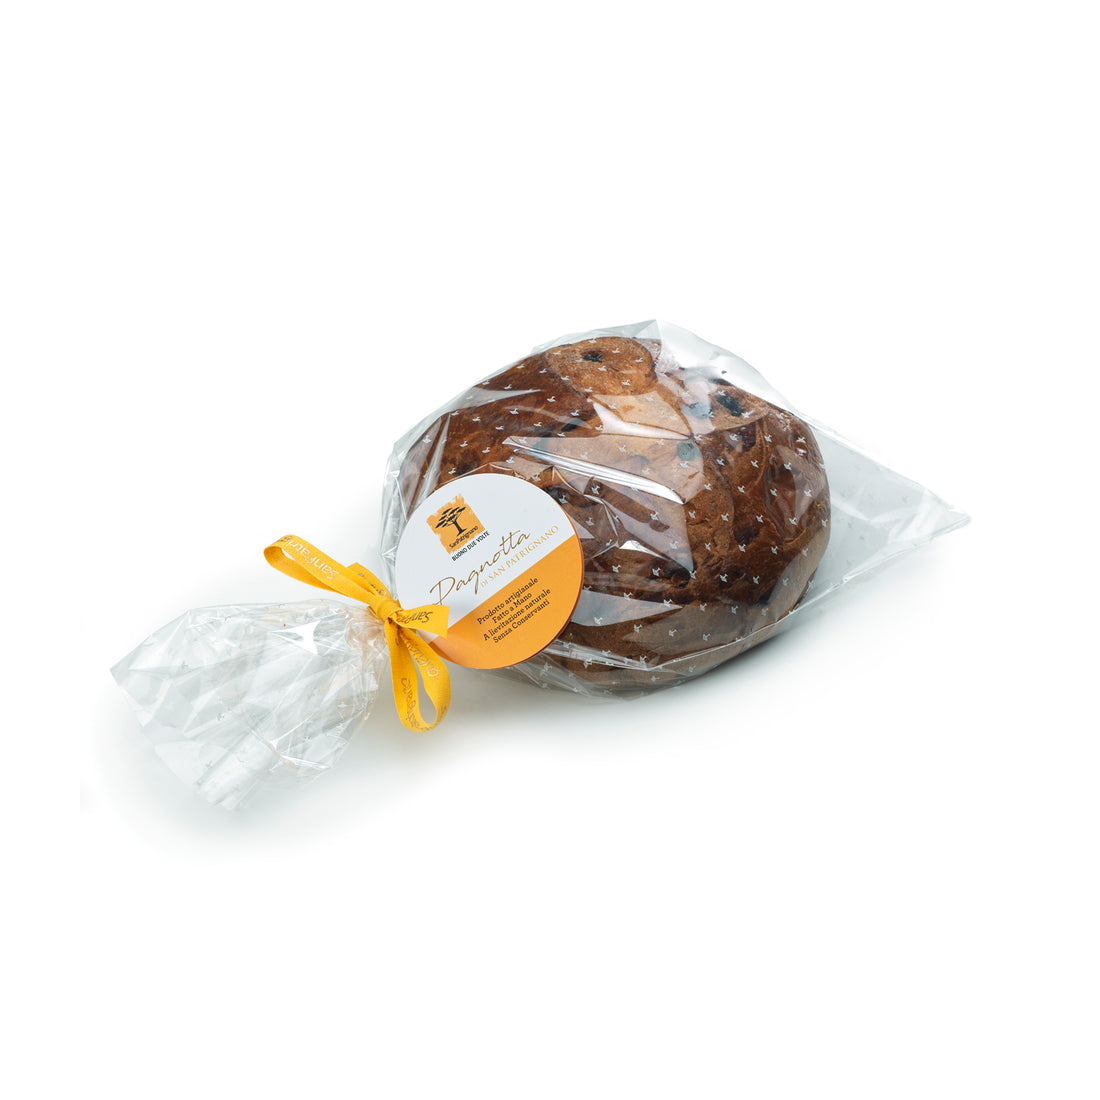 Pagnotta pasquale 500g (6028726993056)